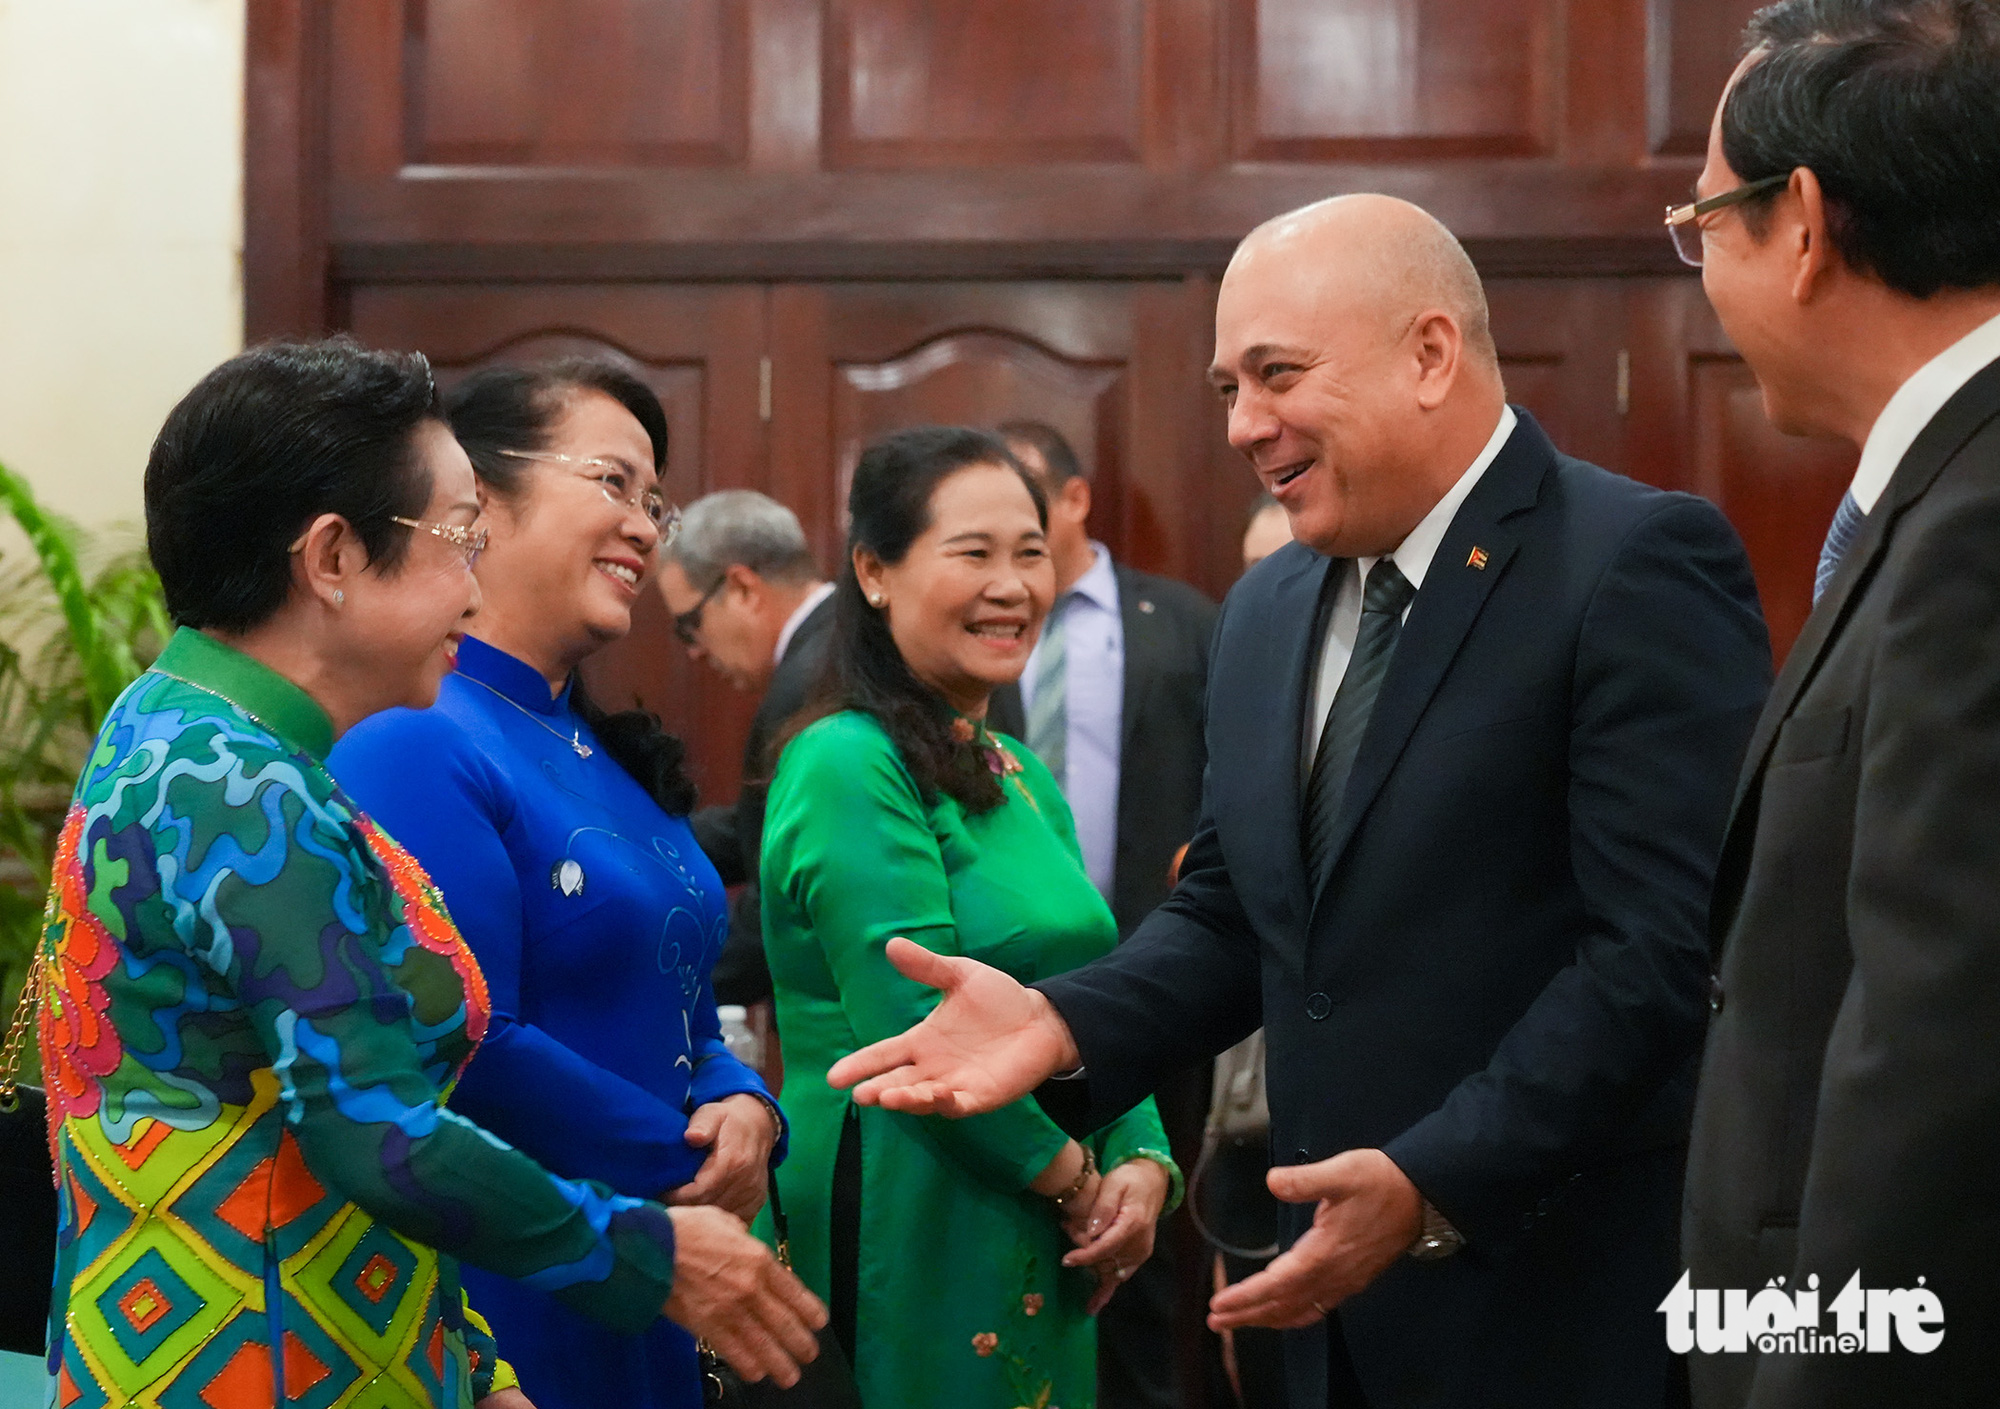 Roberto Morales Ojeda, Politburo member and permanent member of the Secretariat of Cuba’s Communist Party Central Committee, meets with Ho Chi Minh City leaders on May 1, 2023. Photo: Huu Hanh / Tuoi Tre